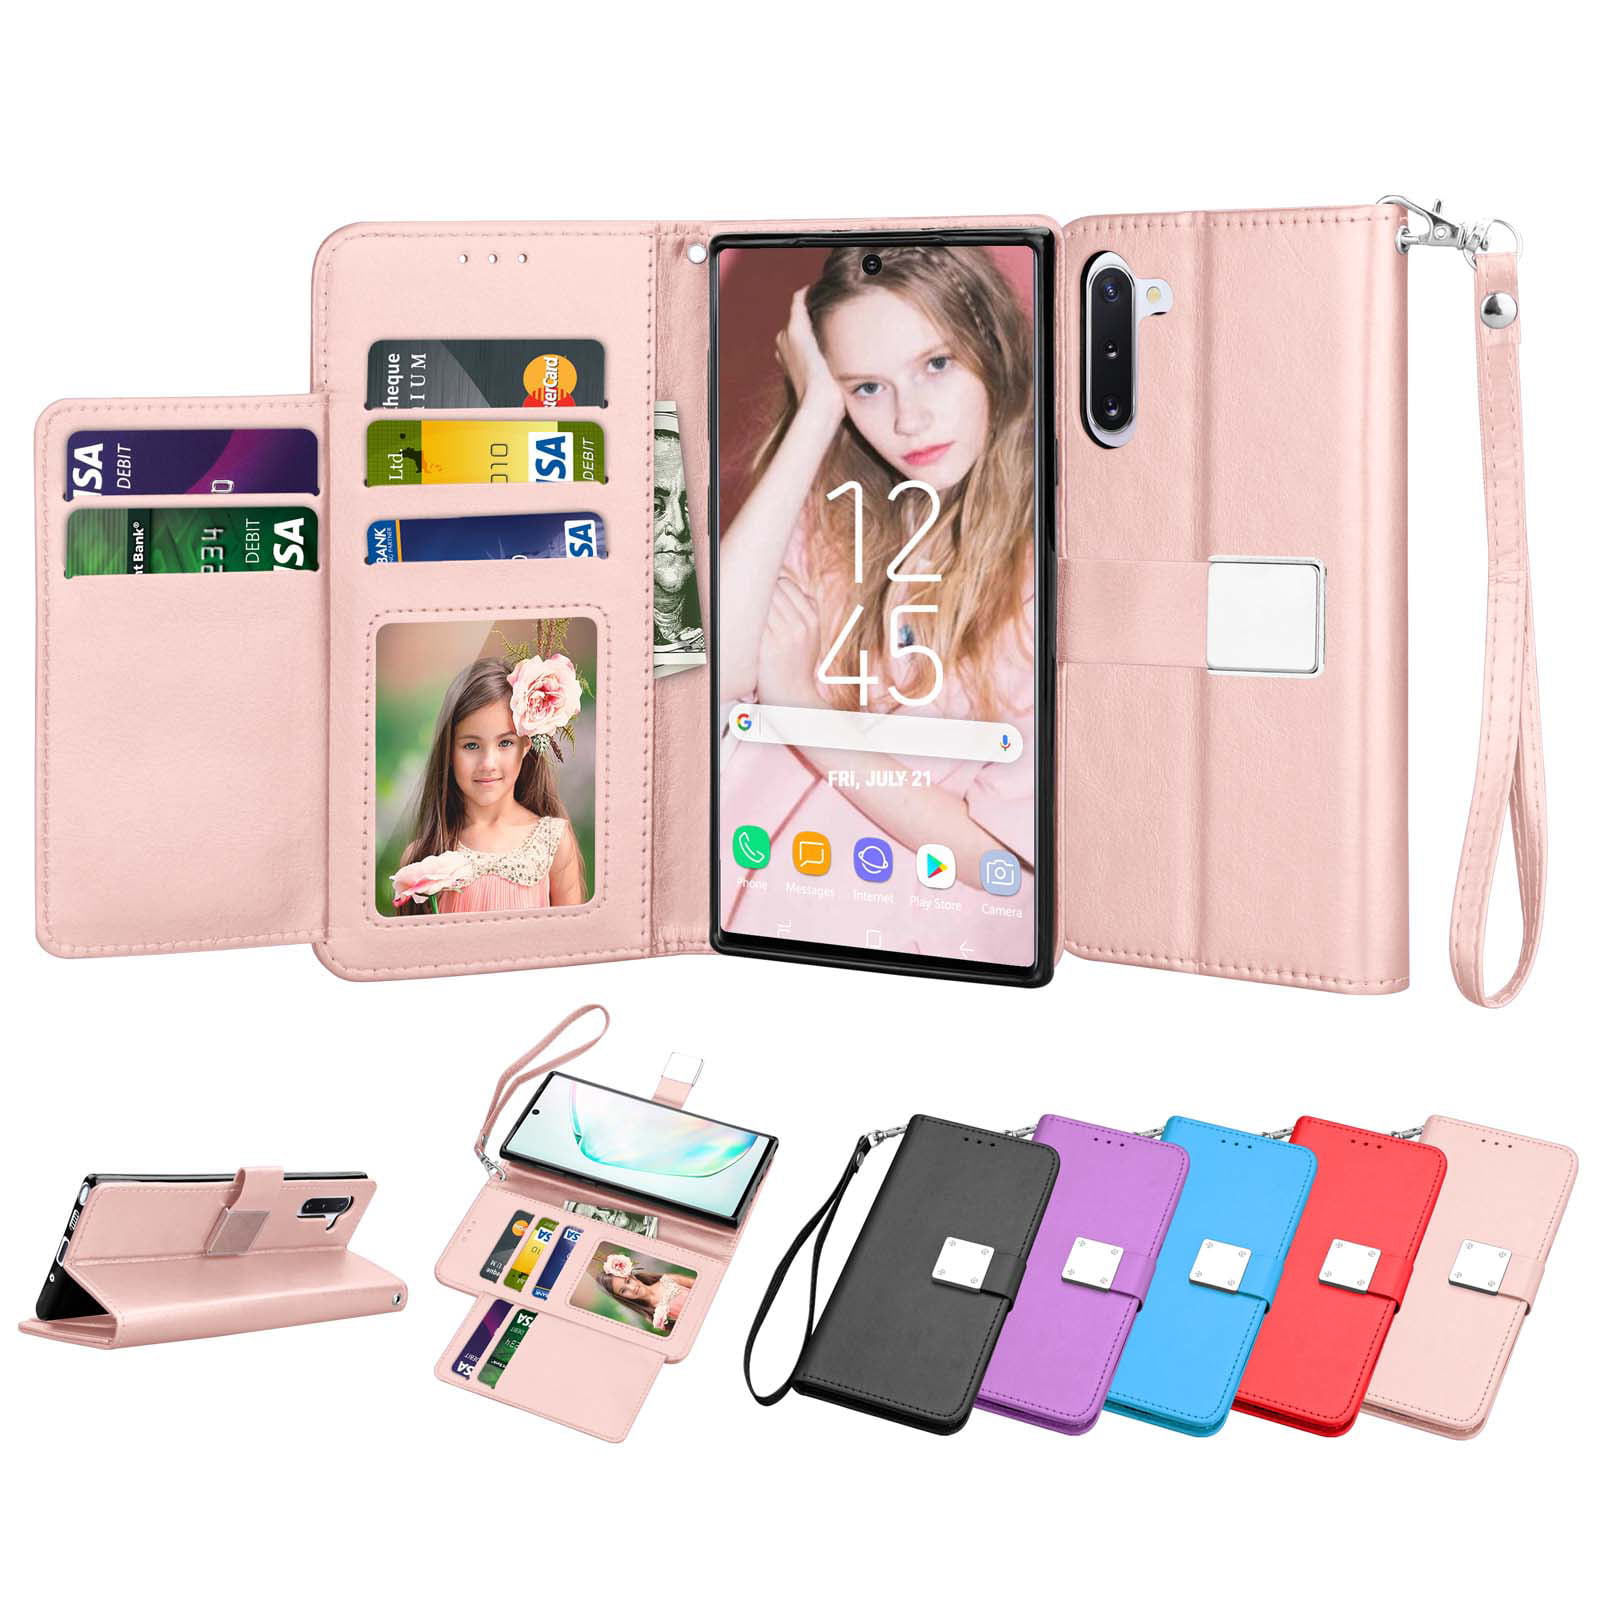 Samsung Galaxy Note 10 PRO Flip Case Cover for Samsung Galaxy Note 10 PRO Leather Cell Phone Cover Extra-Durable Business Kickstand Card Holders with Free Waterproof-Bag Elegant 